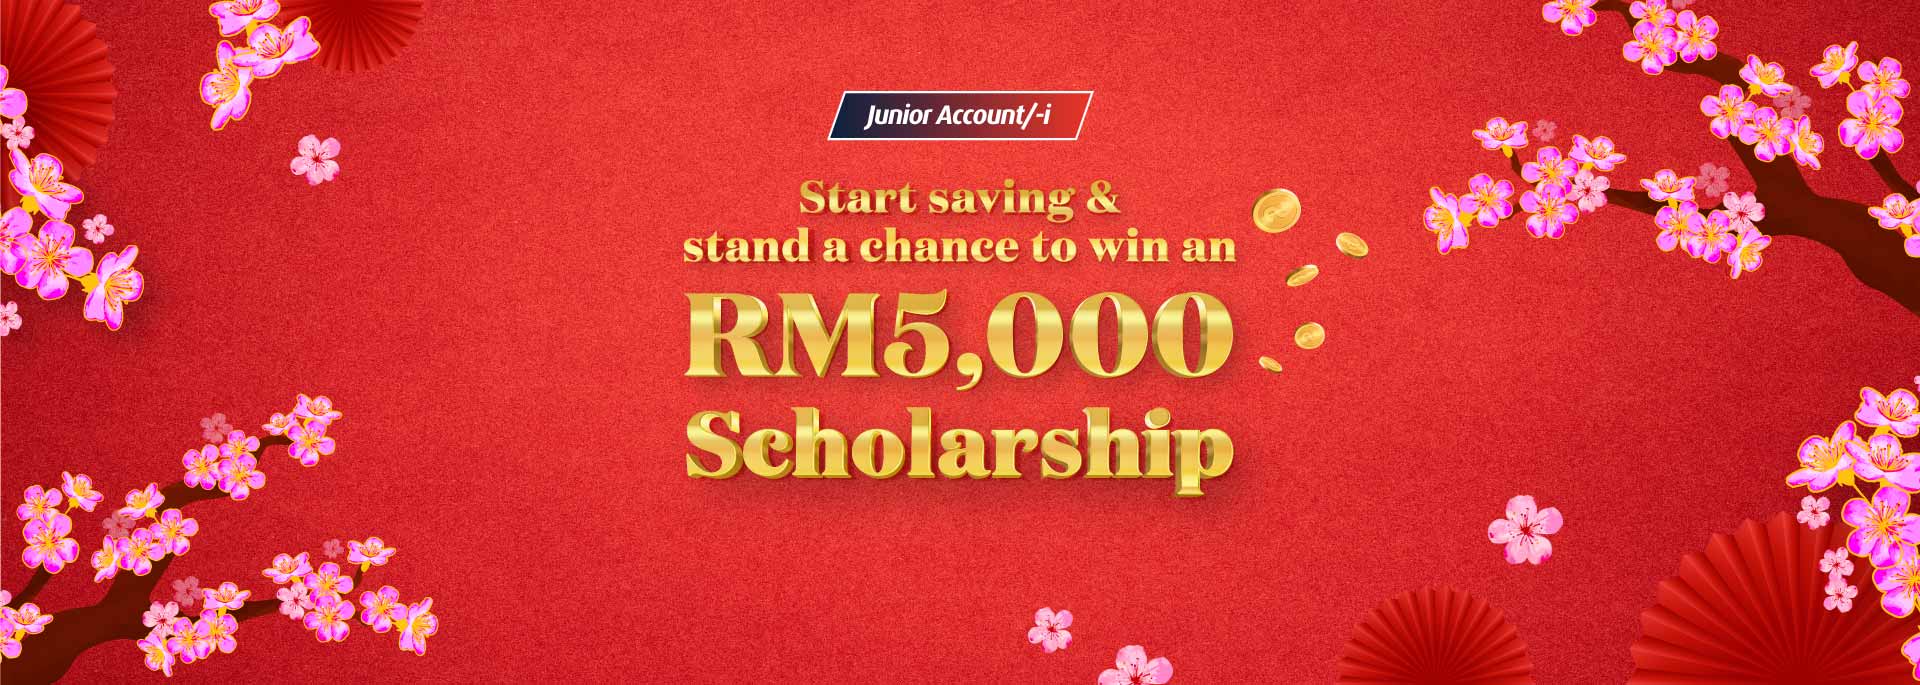 Deposit in your child’s HLB Junior Account/-i for a chance to win a scholarship